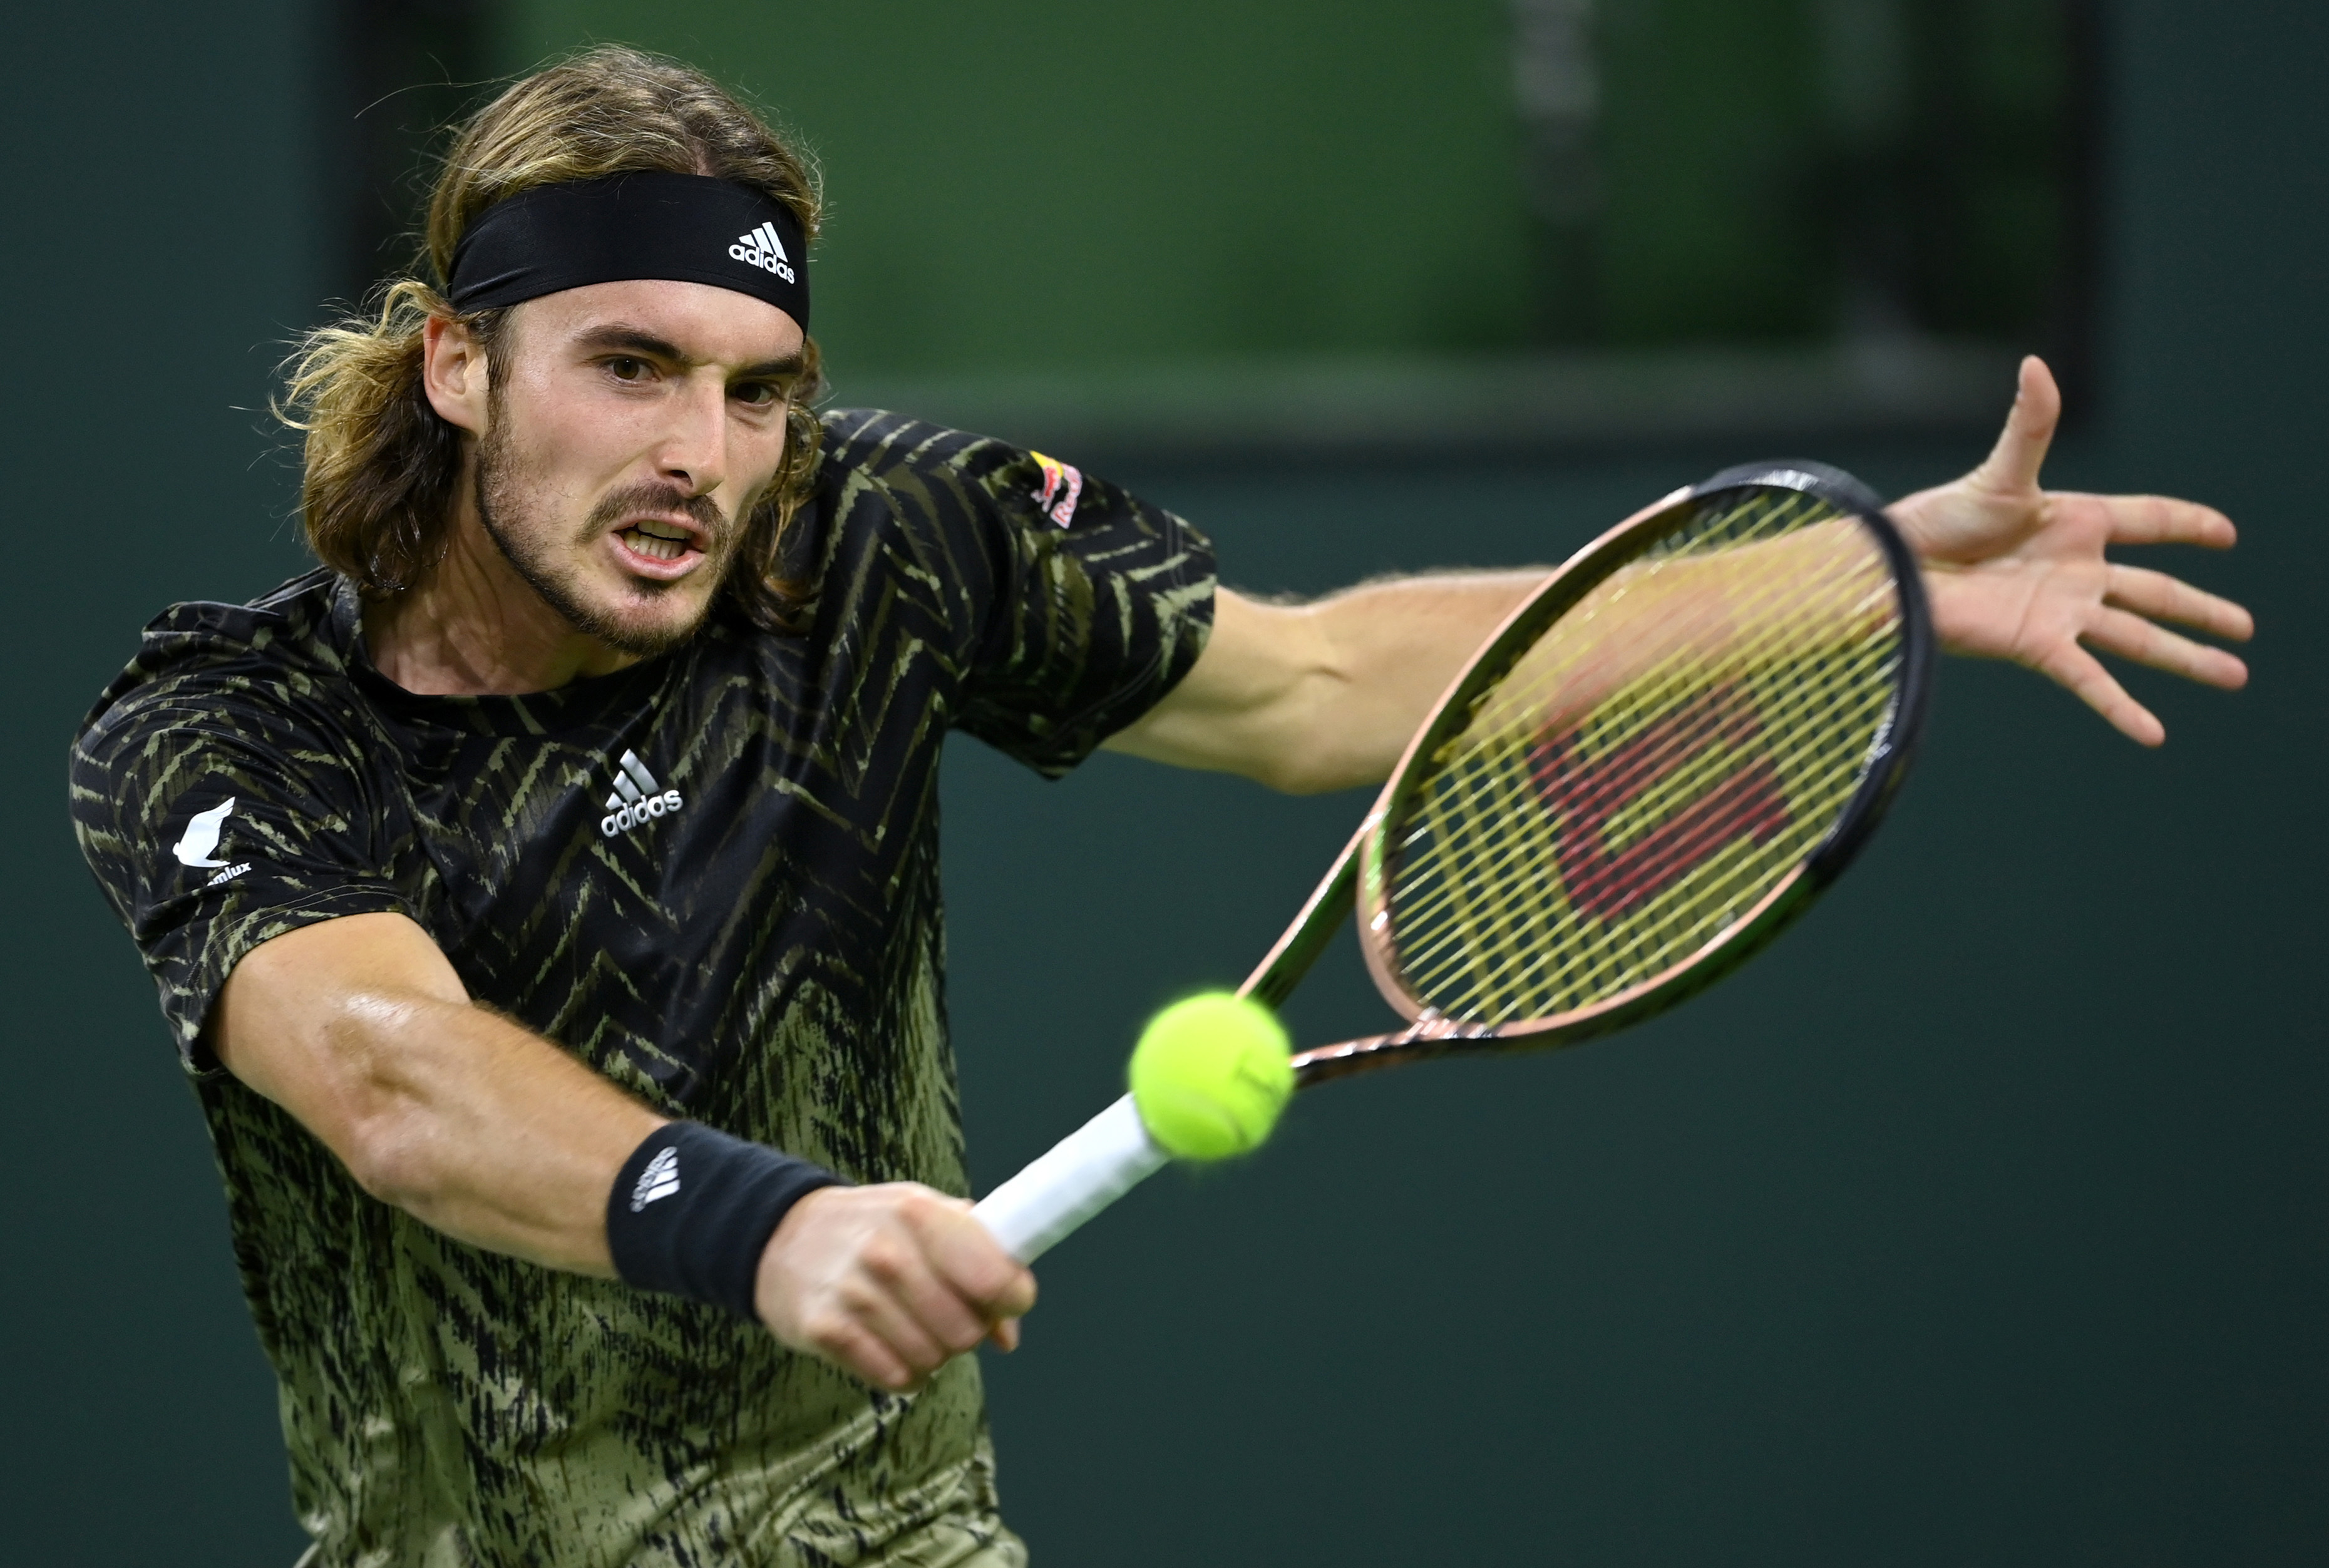 Oct 12, 2021; Indian Wells, CA, USA; Stefanos Tsitsipas (GRE) hits a shot against Fabio Fognini (ITA) during a third round match in the BNP Paribas Open at the Indian Wells Tennis Garden. Mandatory Credit: Jayne Kamin-Oncea-USA TODAY Sports